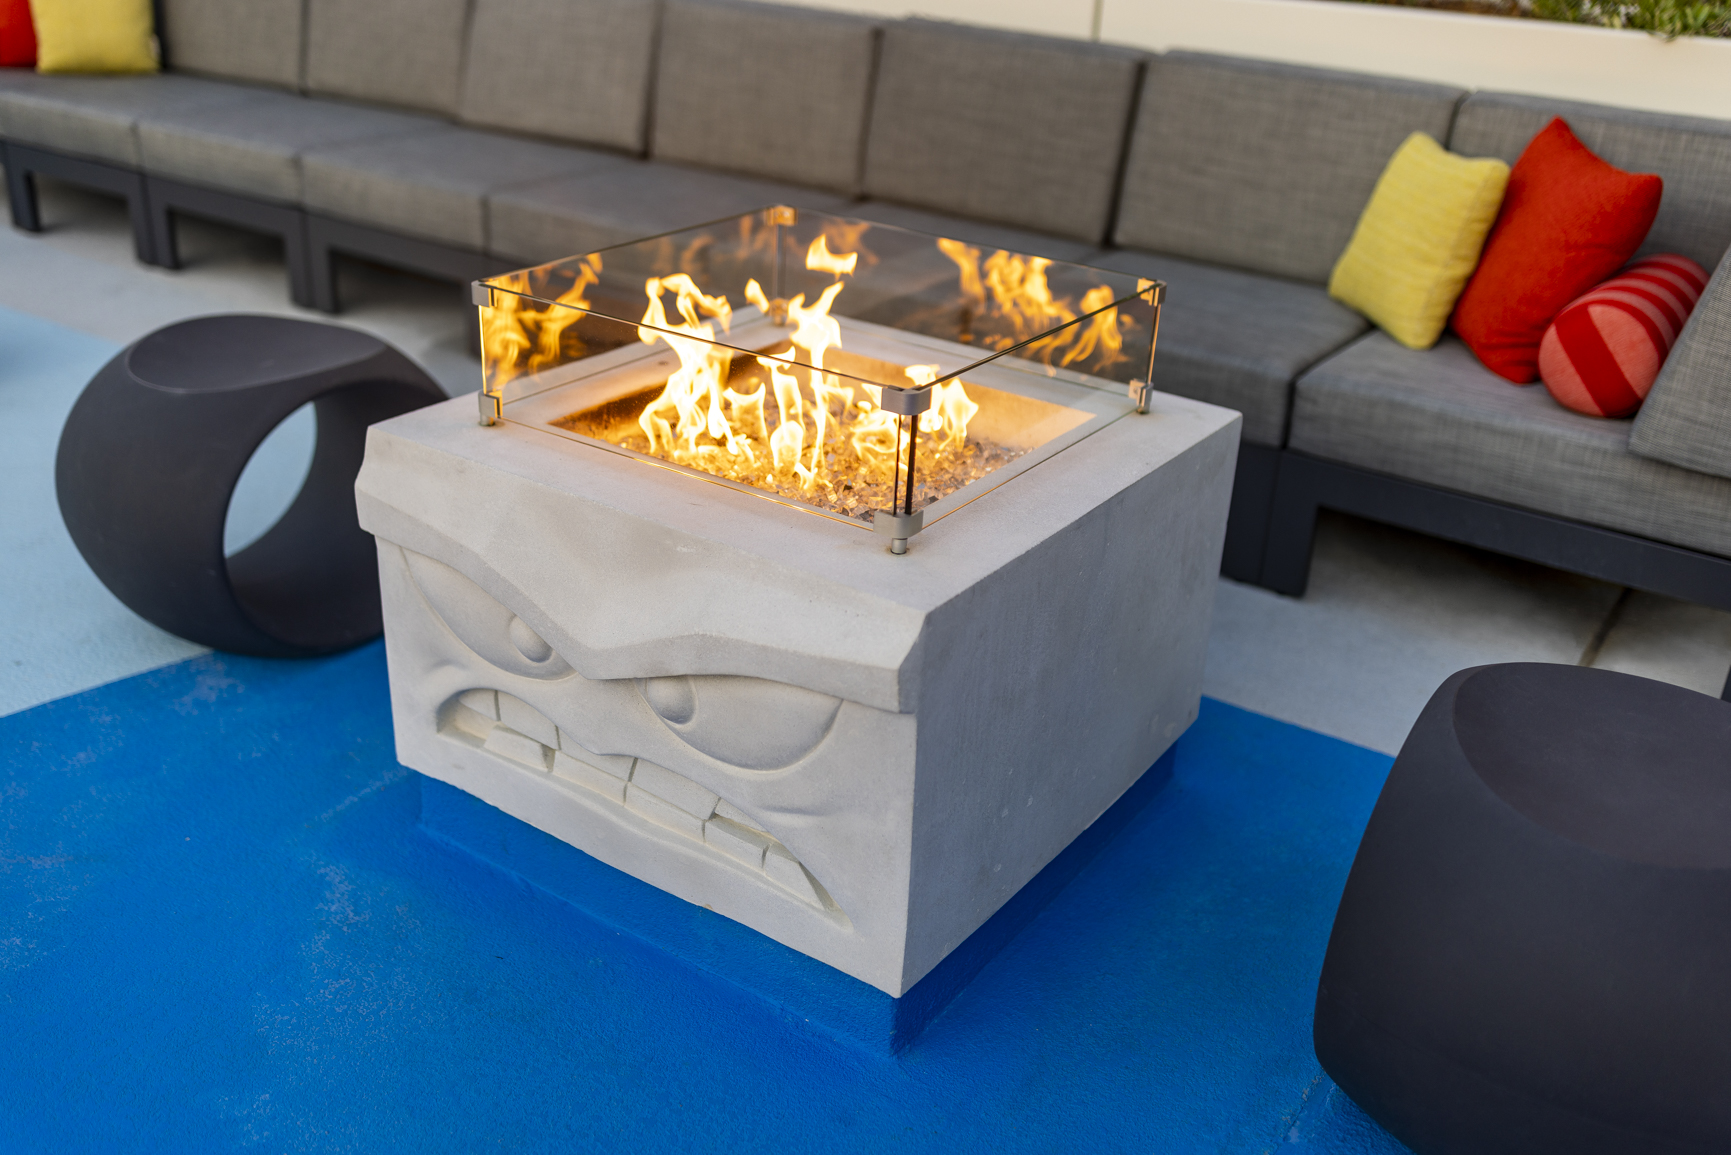 At Pixar Place Hotel at Disneyland Resort in Anaheim, Calif., guests can lounge on the rooftop deck near the pool on cozy couches surrounding firepits inspired by some of Pixar’s more hotheaded characters, including Jack-Jack from Pixar’s “The Incredibles” and Anger from Pixar’s “Inside Out.” (Christian Thompson/Disneyland Resort)